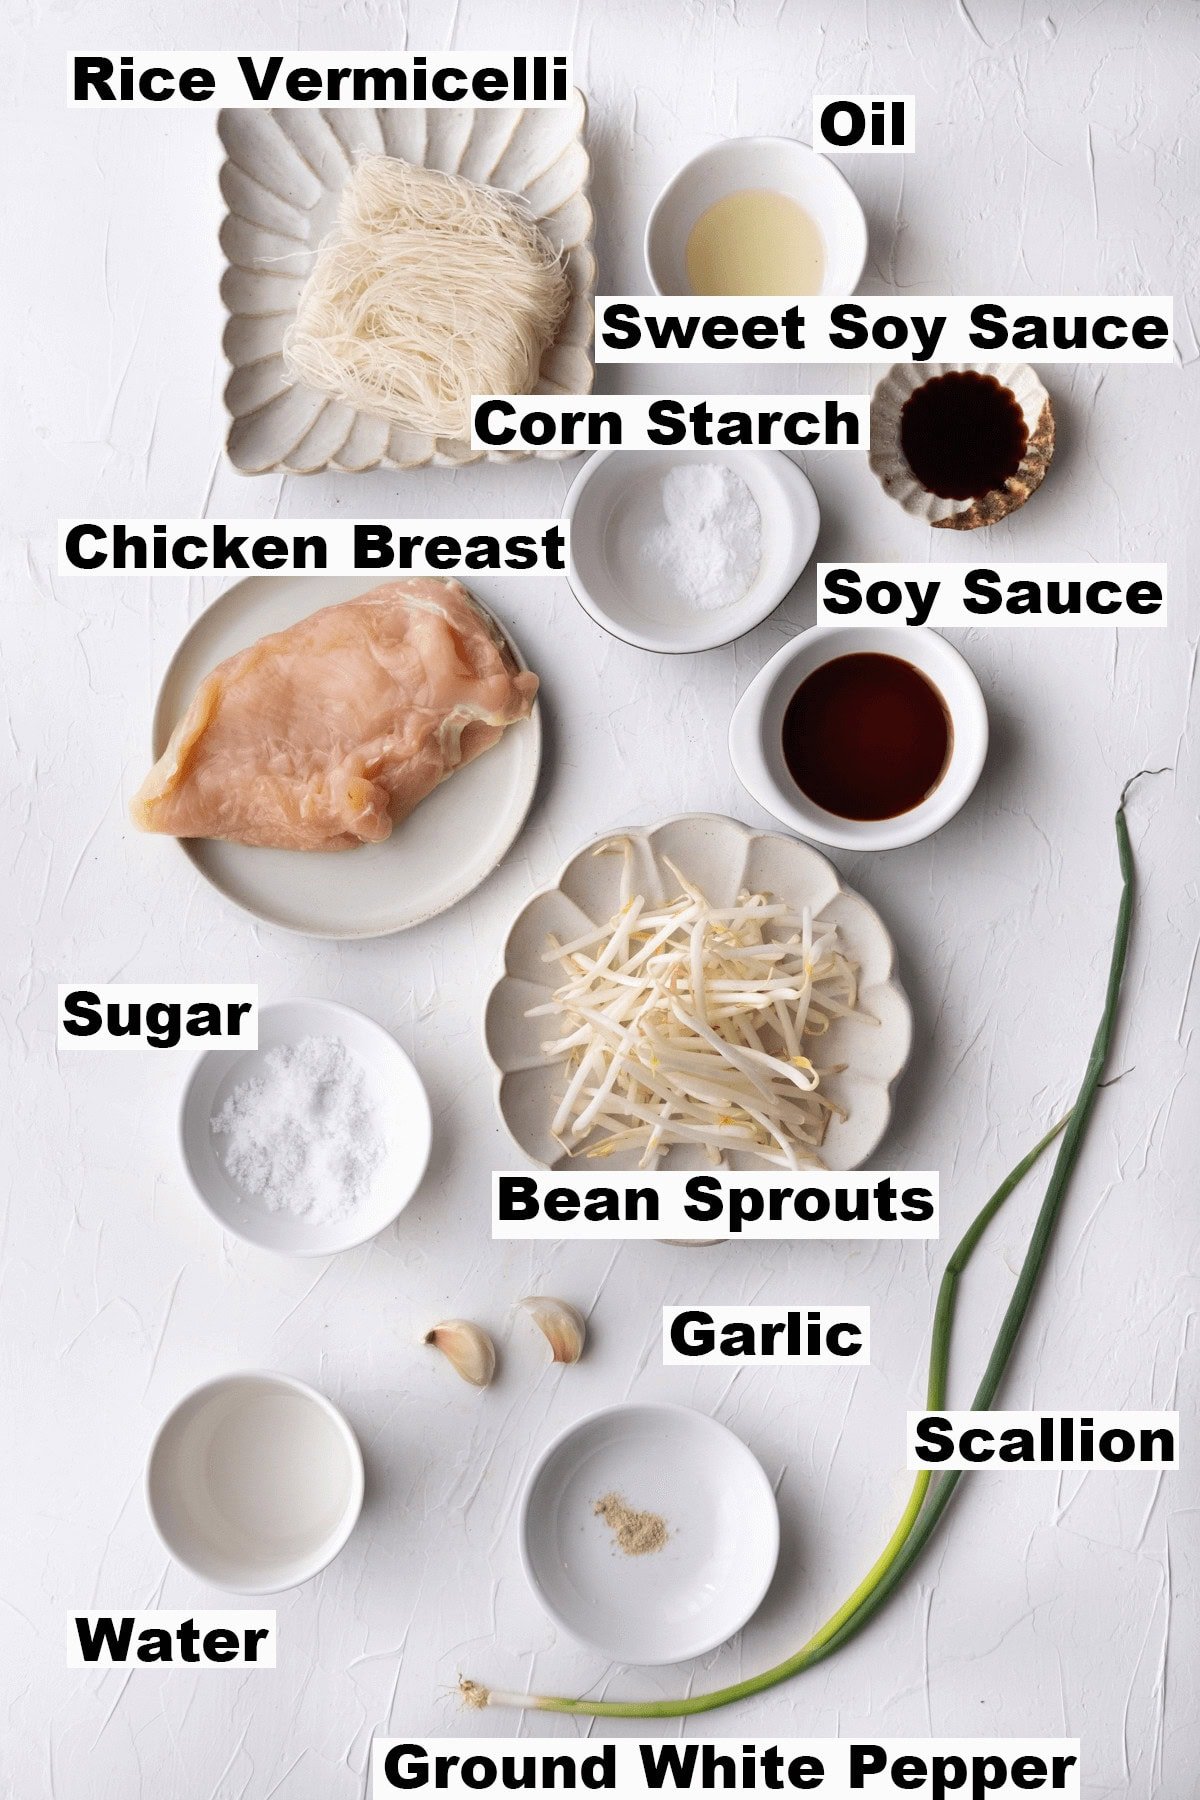 Ingredients for fried rice vermicelli.